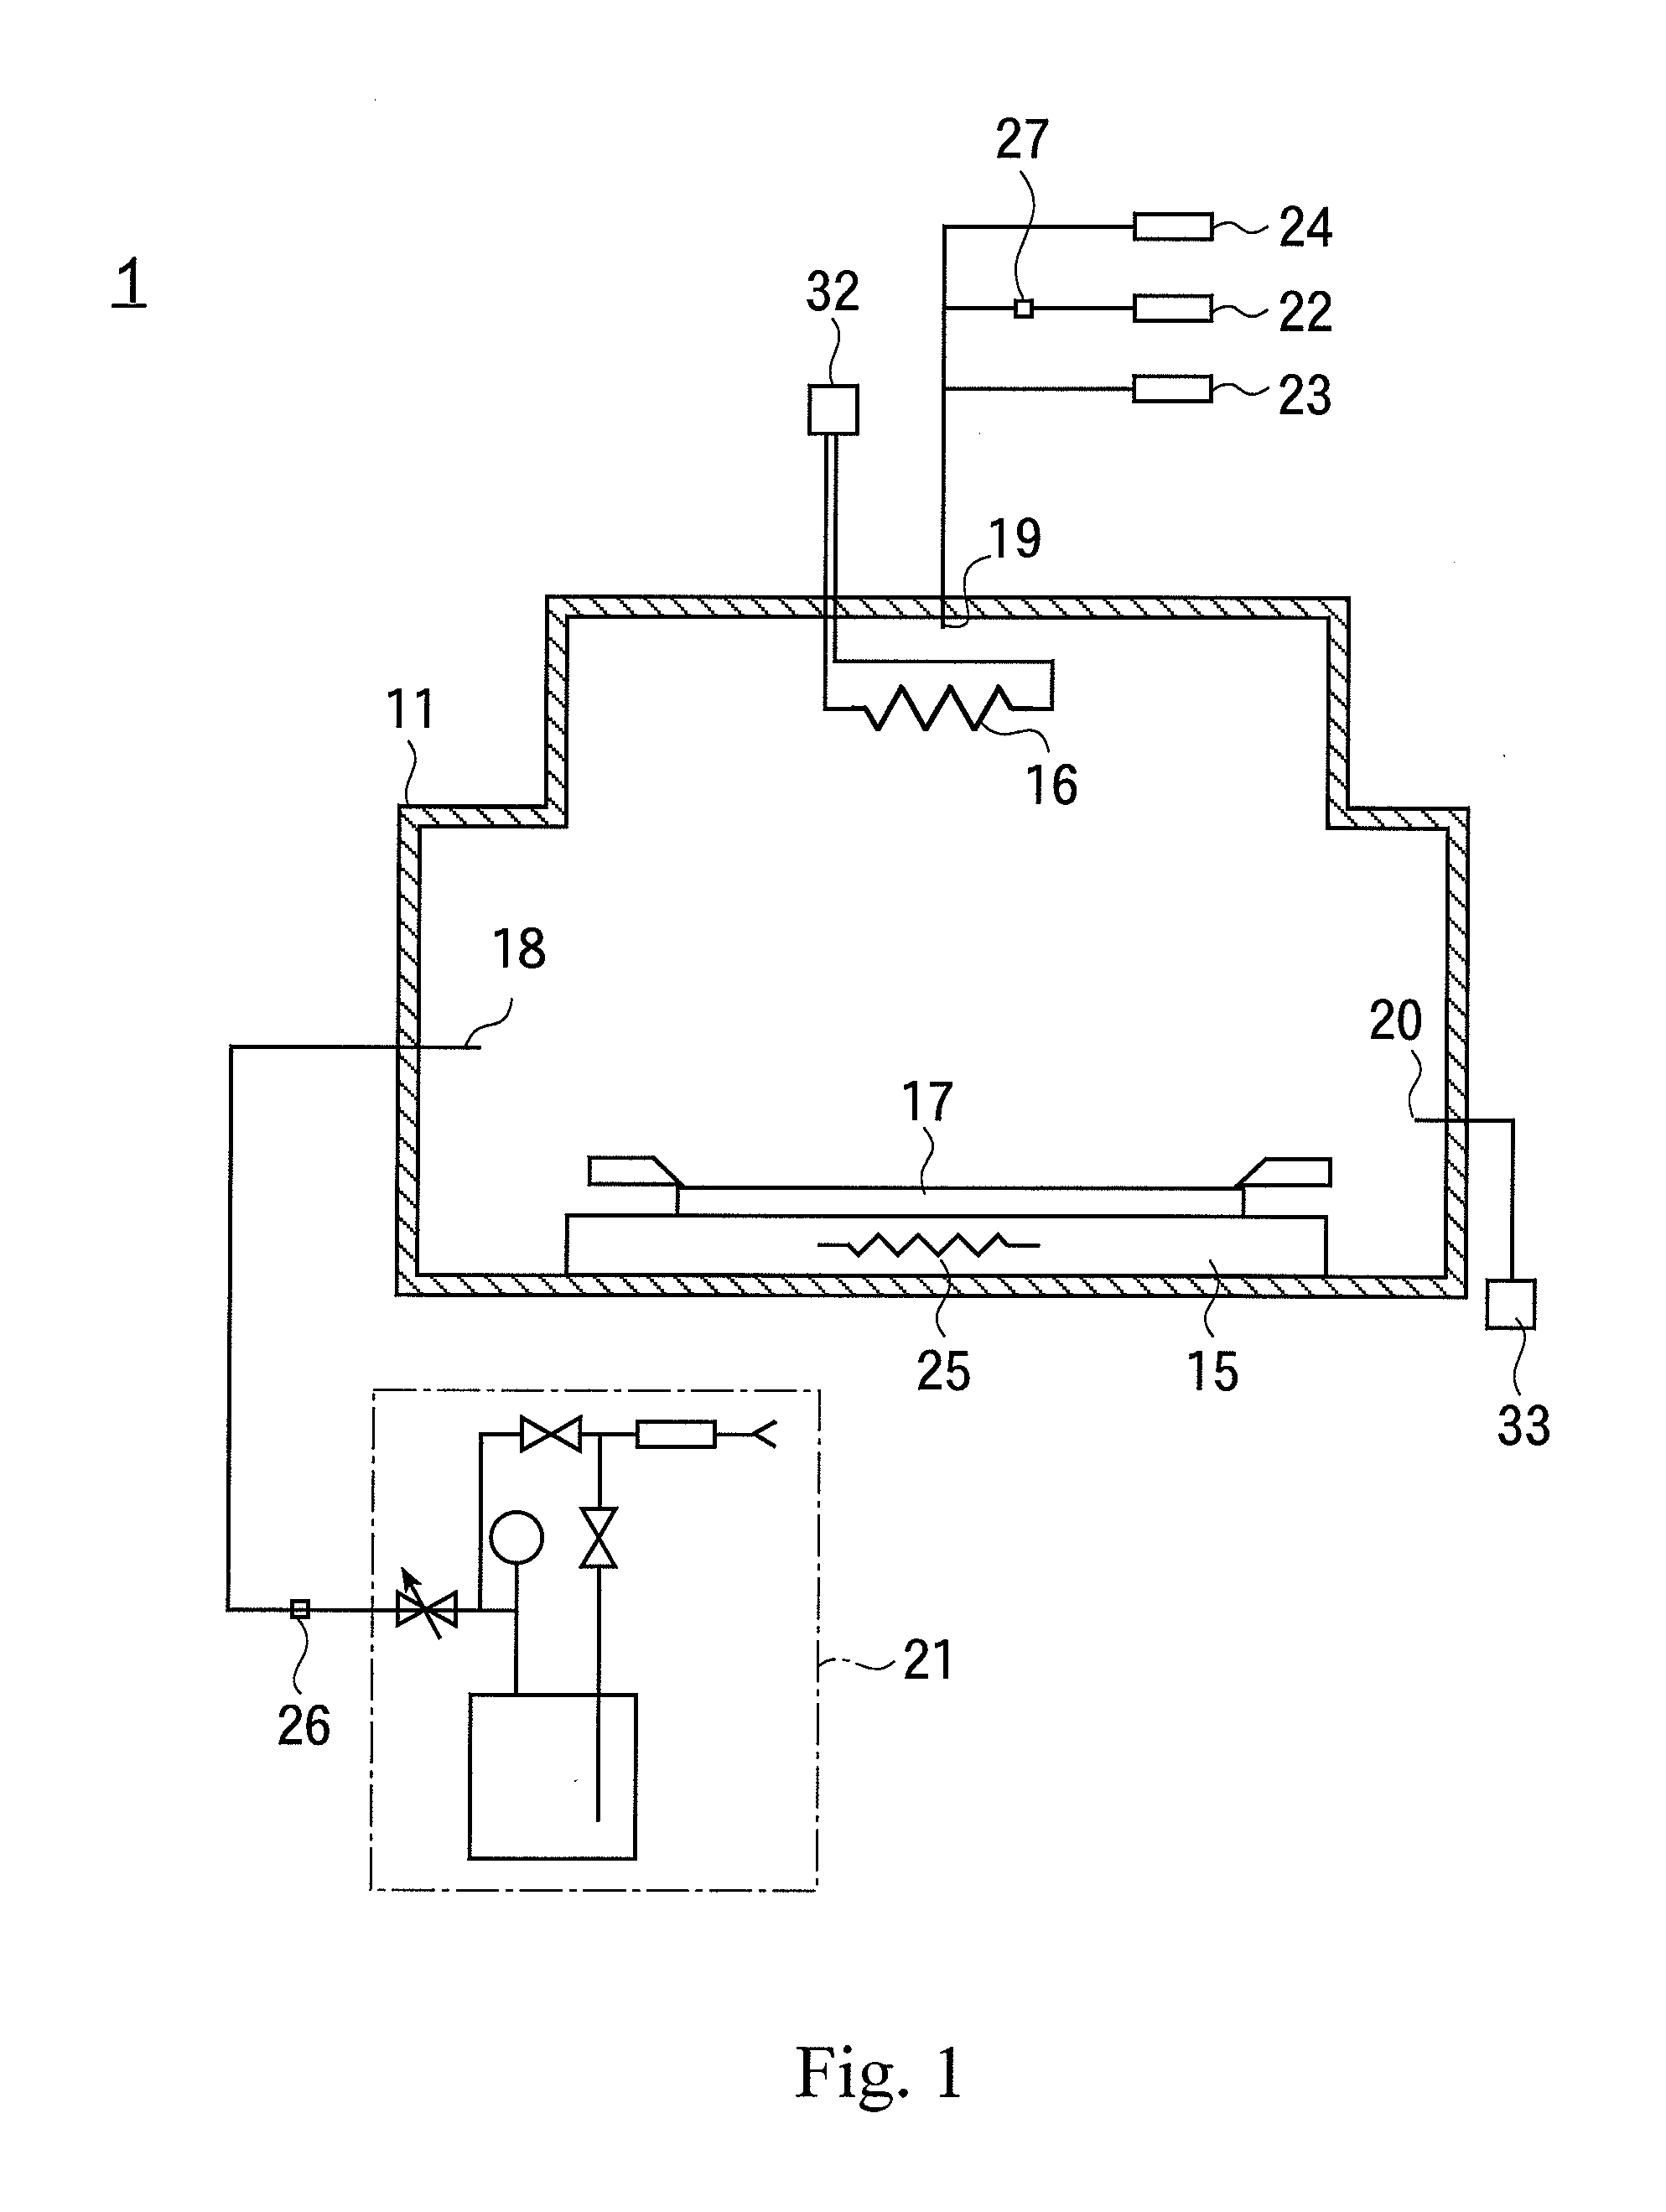 Film forming apparatus and a barrier film producing method